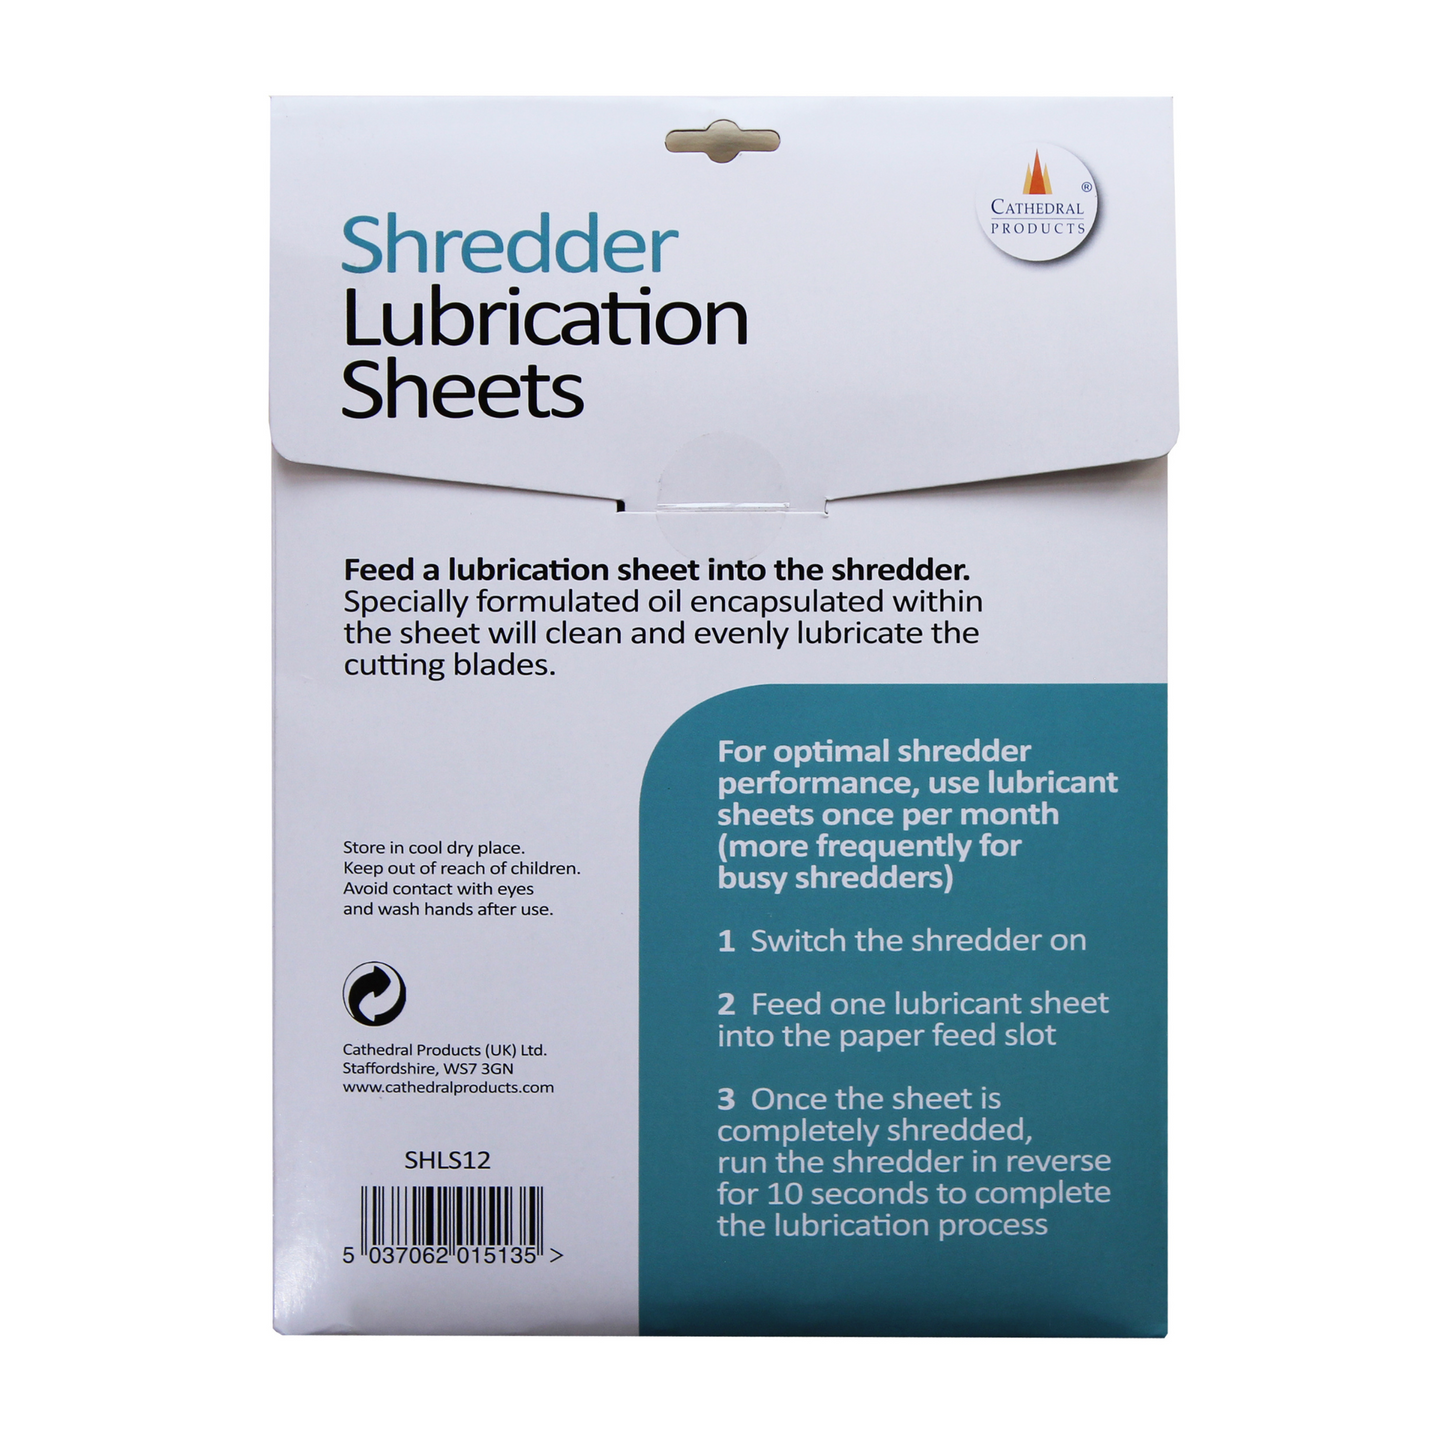 Back of the packaging for Cathedral Products' shredder lubrication sheets, providing instructions for use and tips for optimal shredder performance. The pack contains 12 sheets, and the label suggests using the sheets once per month or more frequently for busy shredders.